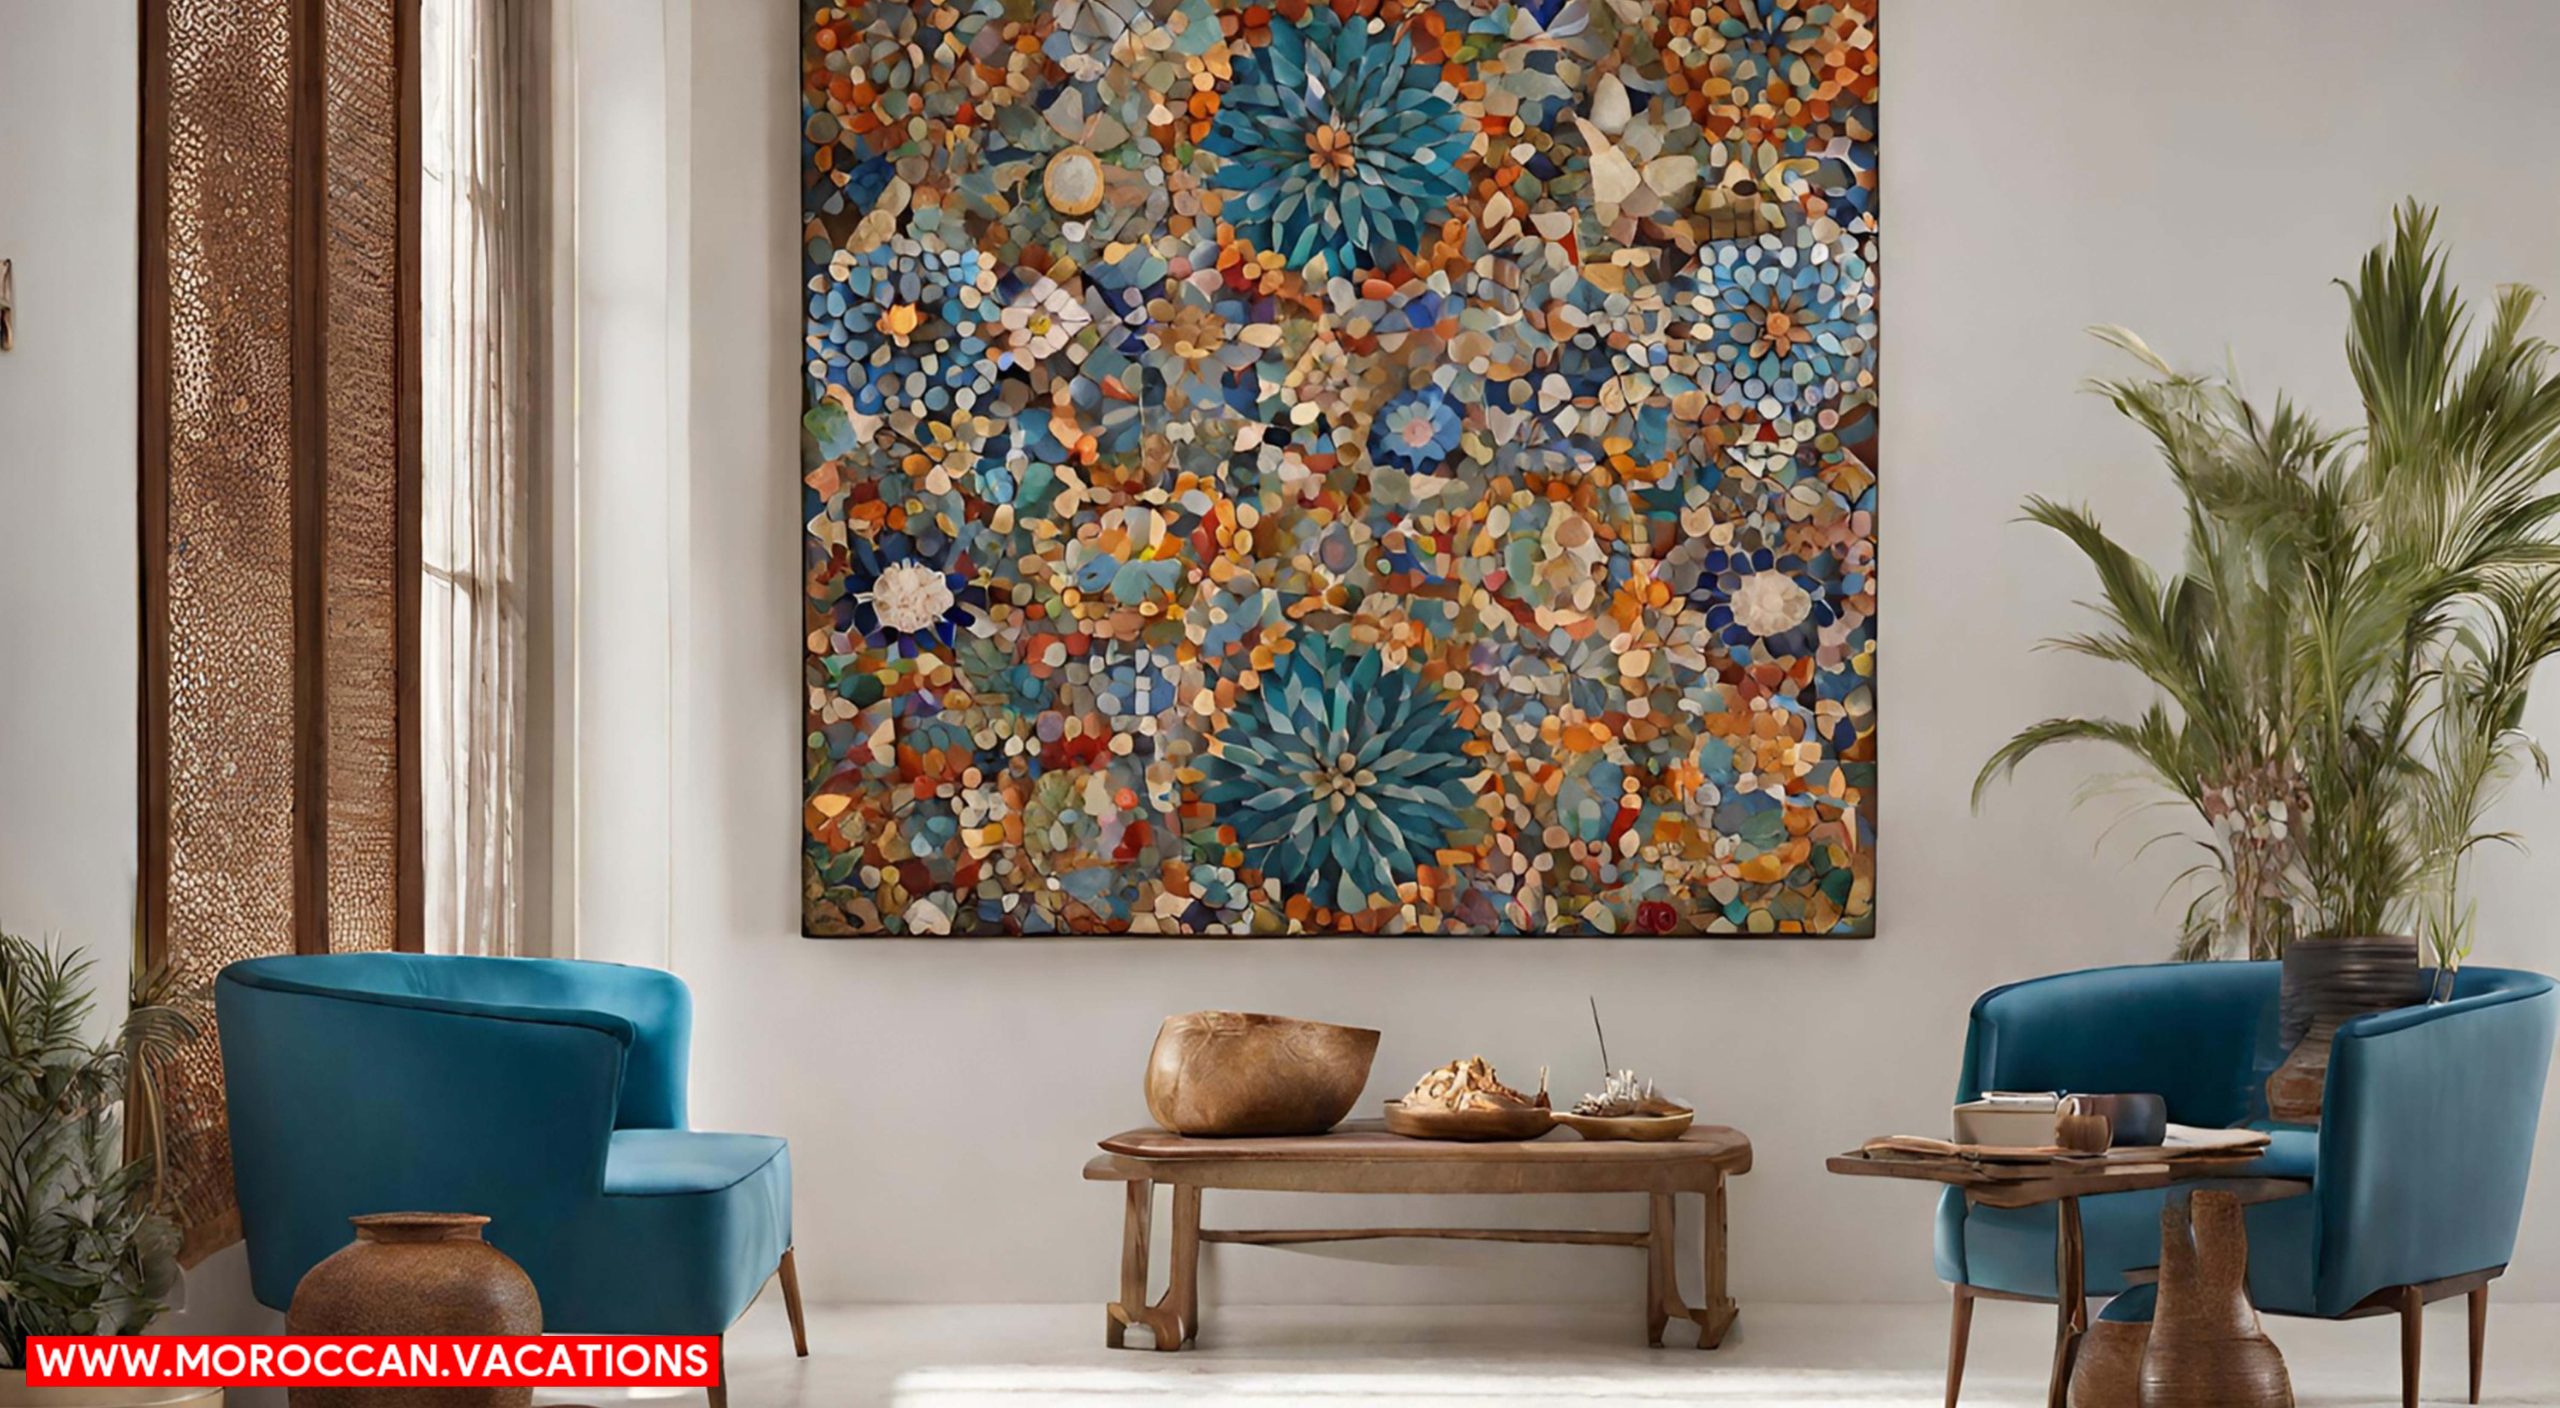 The essence of Moroccan artistic innovation by showcasing a vibrant and intricate mosaic artwork.